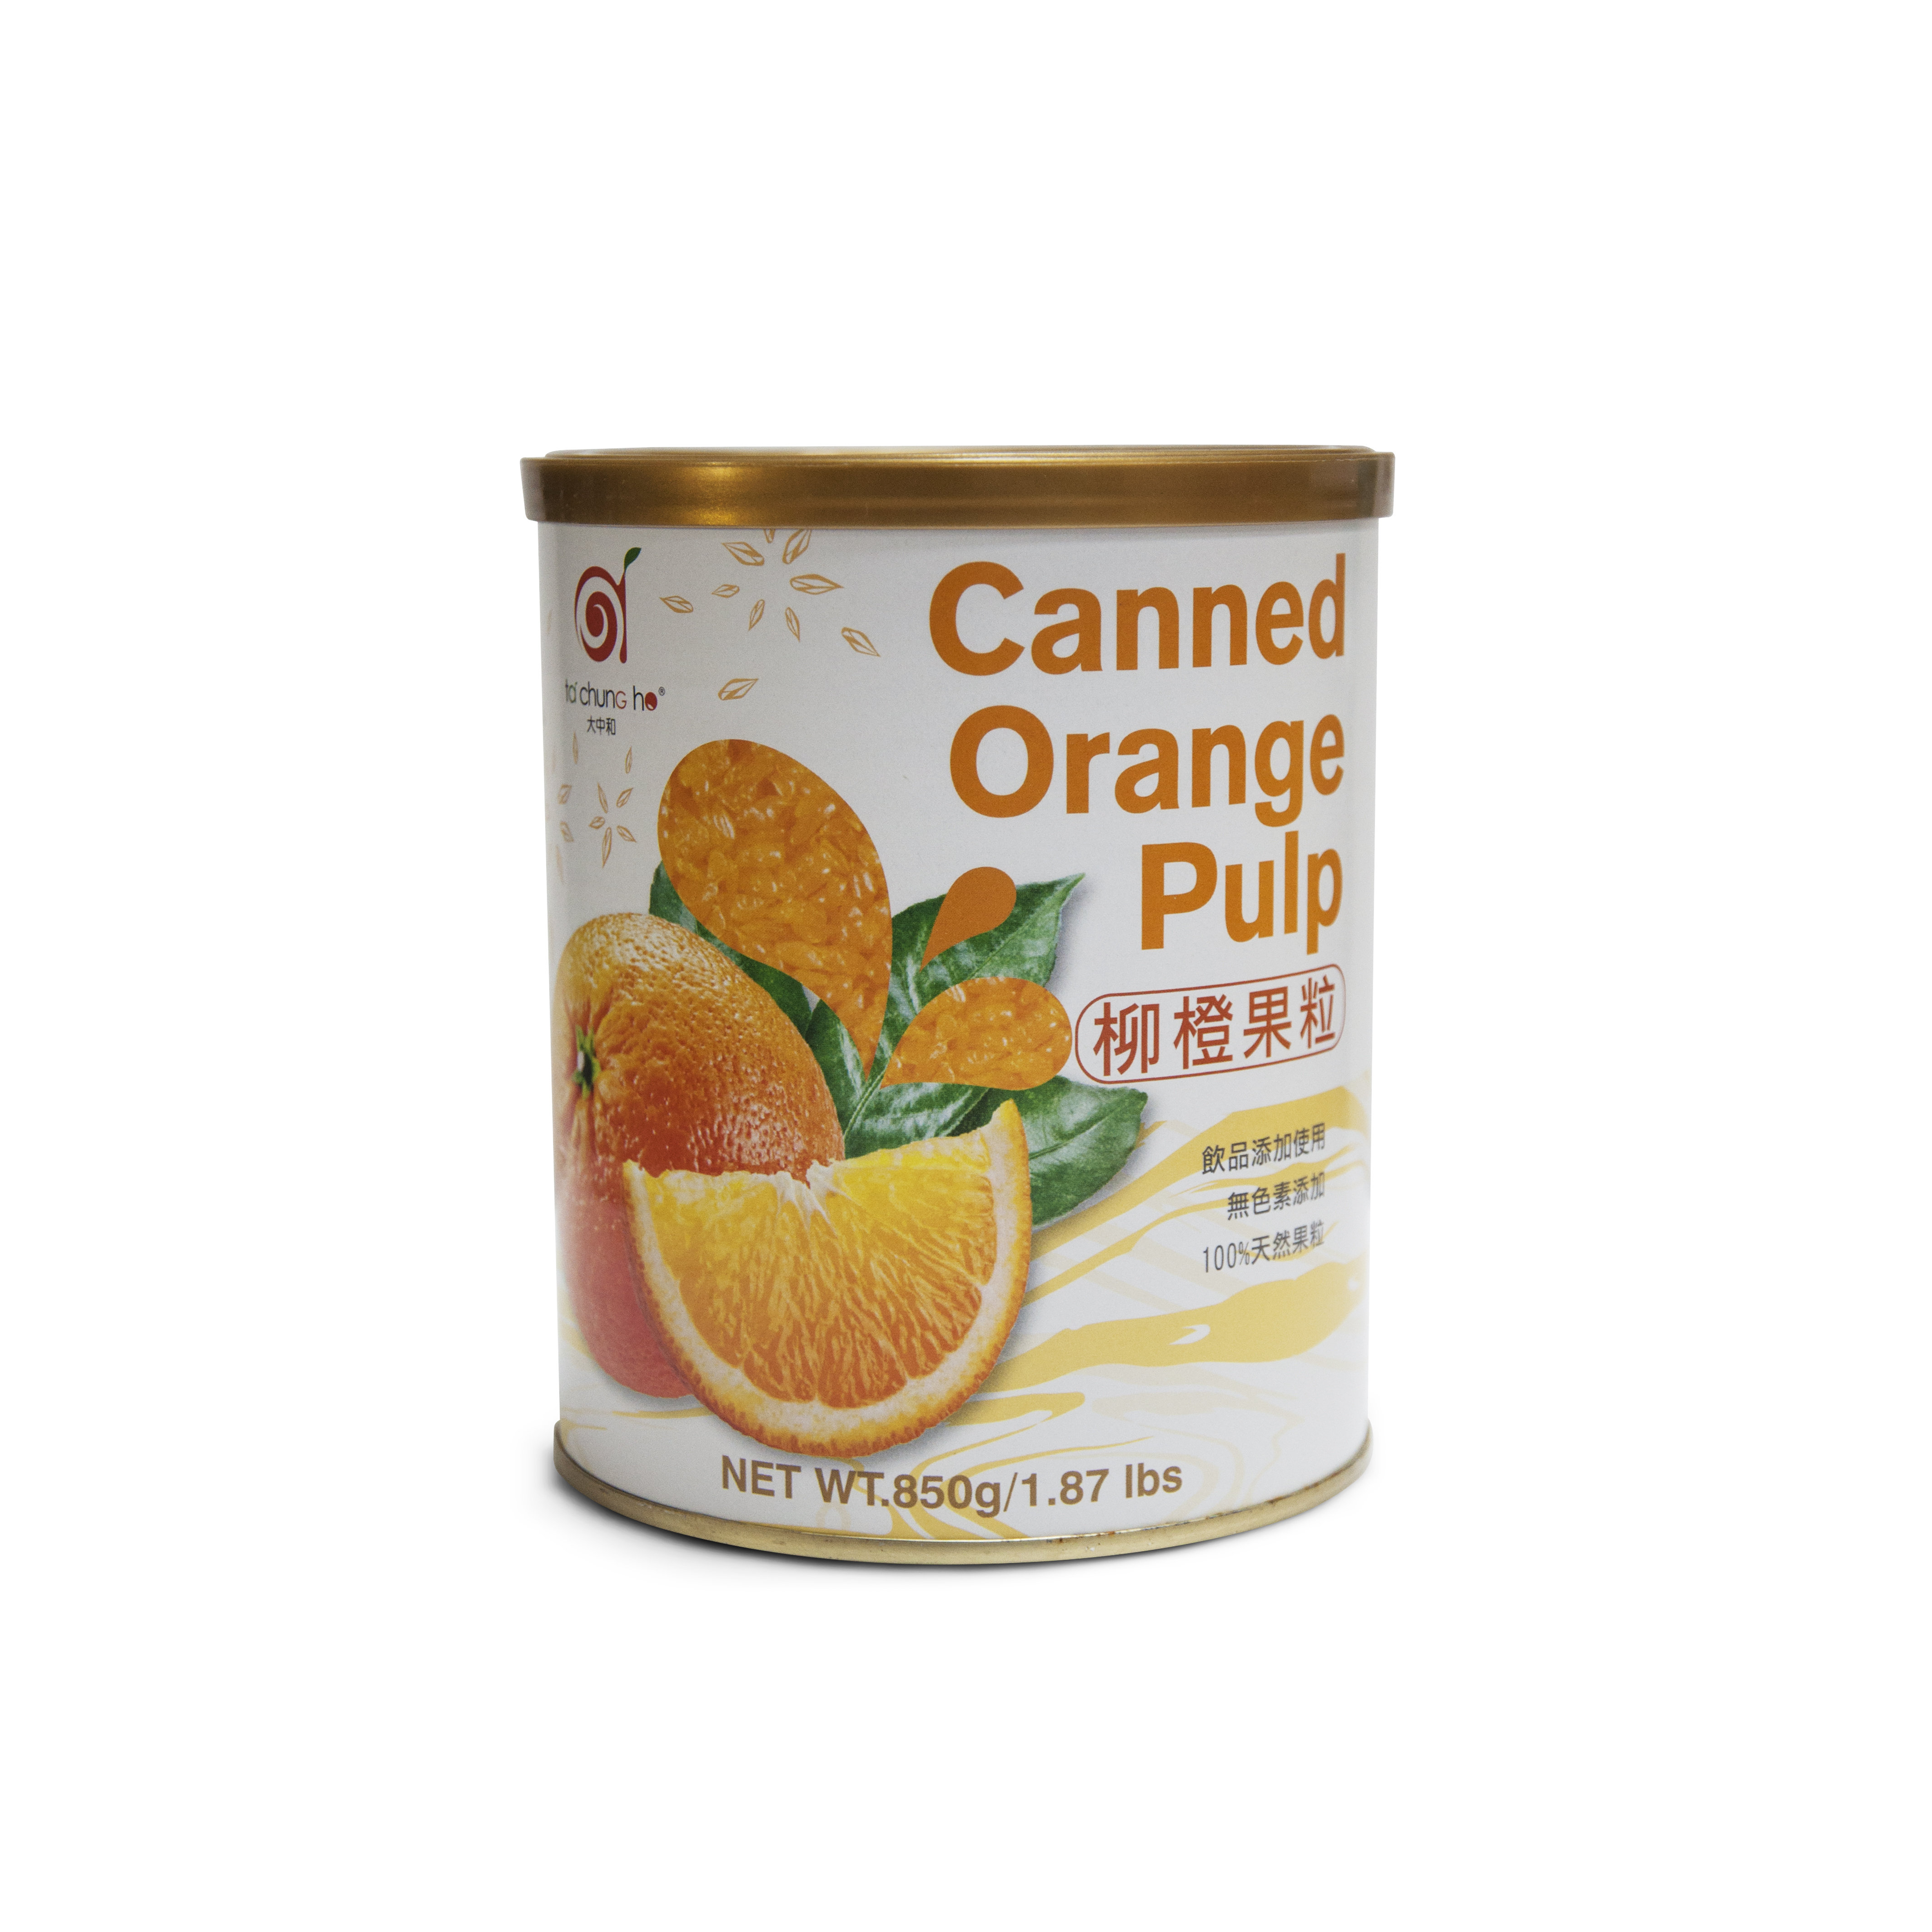 Canned Orange Pulp Package